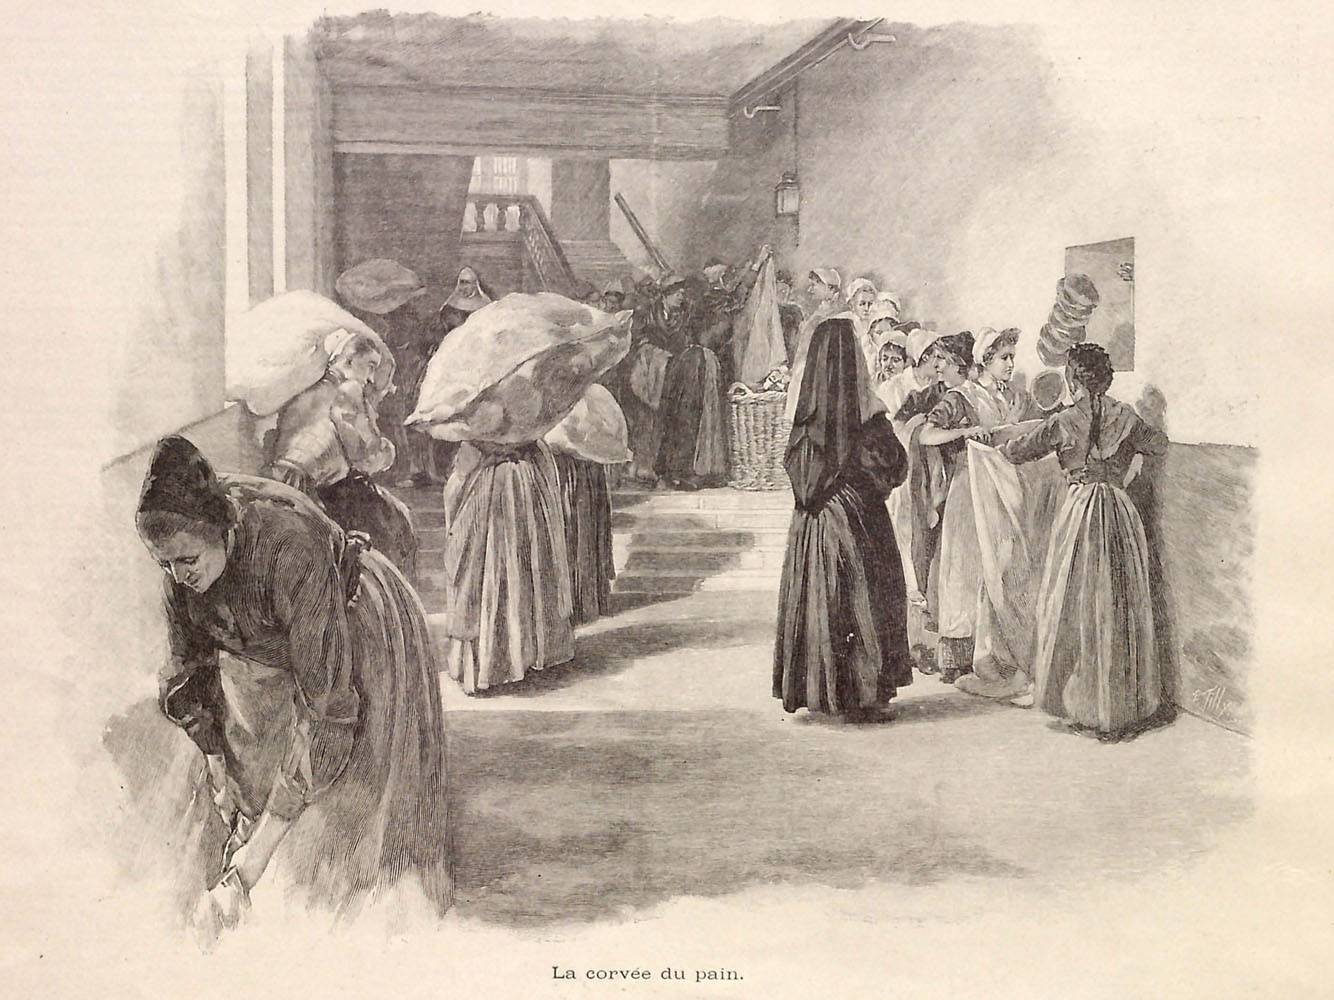 Prisoners collecting bread from the prison bakery